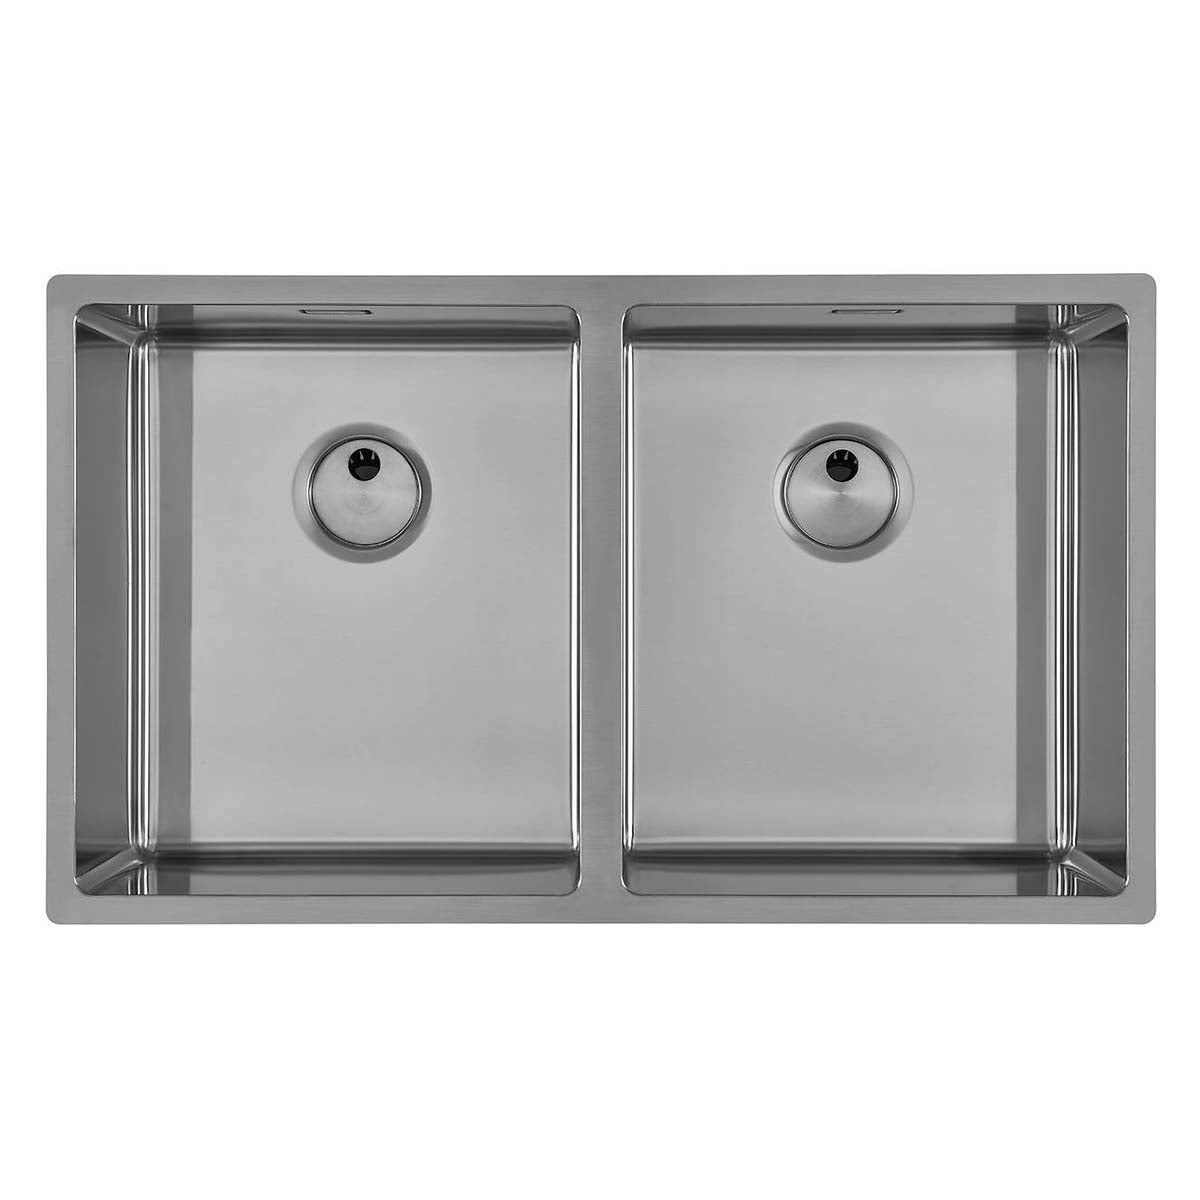 Foster Skin Double Kitchen Sink 750 Brushed Stainless Steel